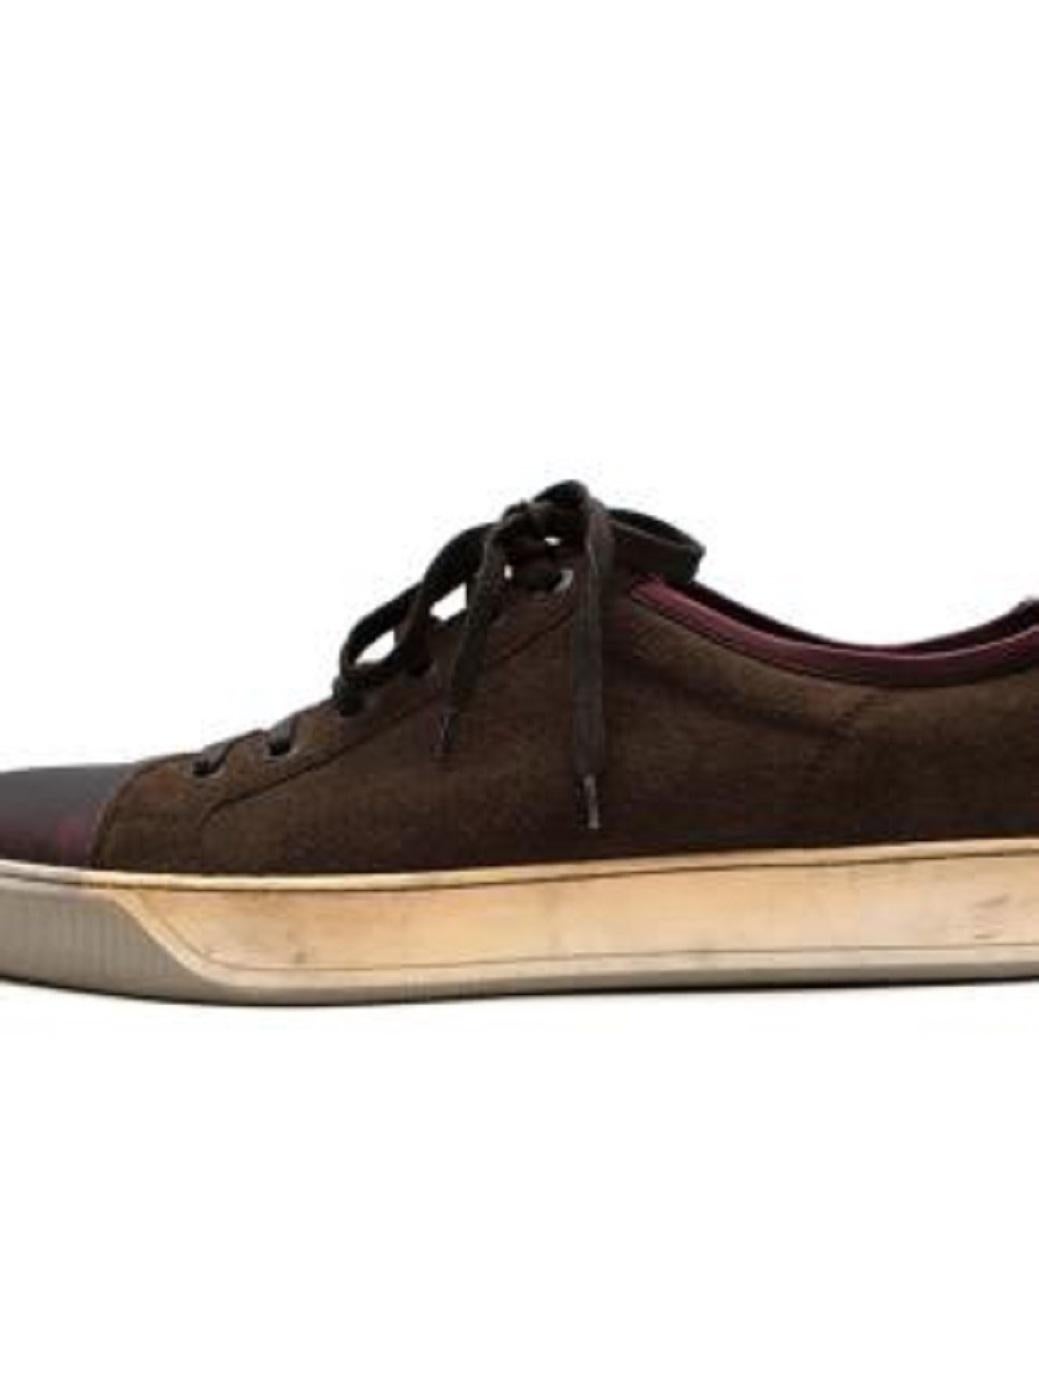 Women's or Men's Lanvin Brown Suede Cap-Toe Lace-Up Sneakers For Sale